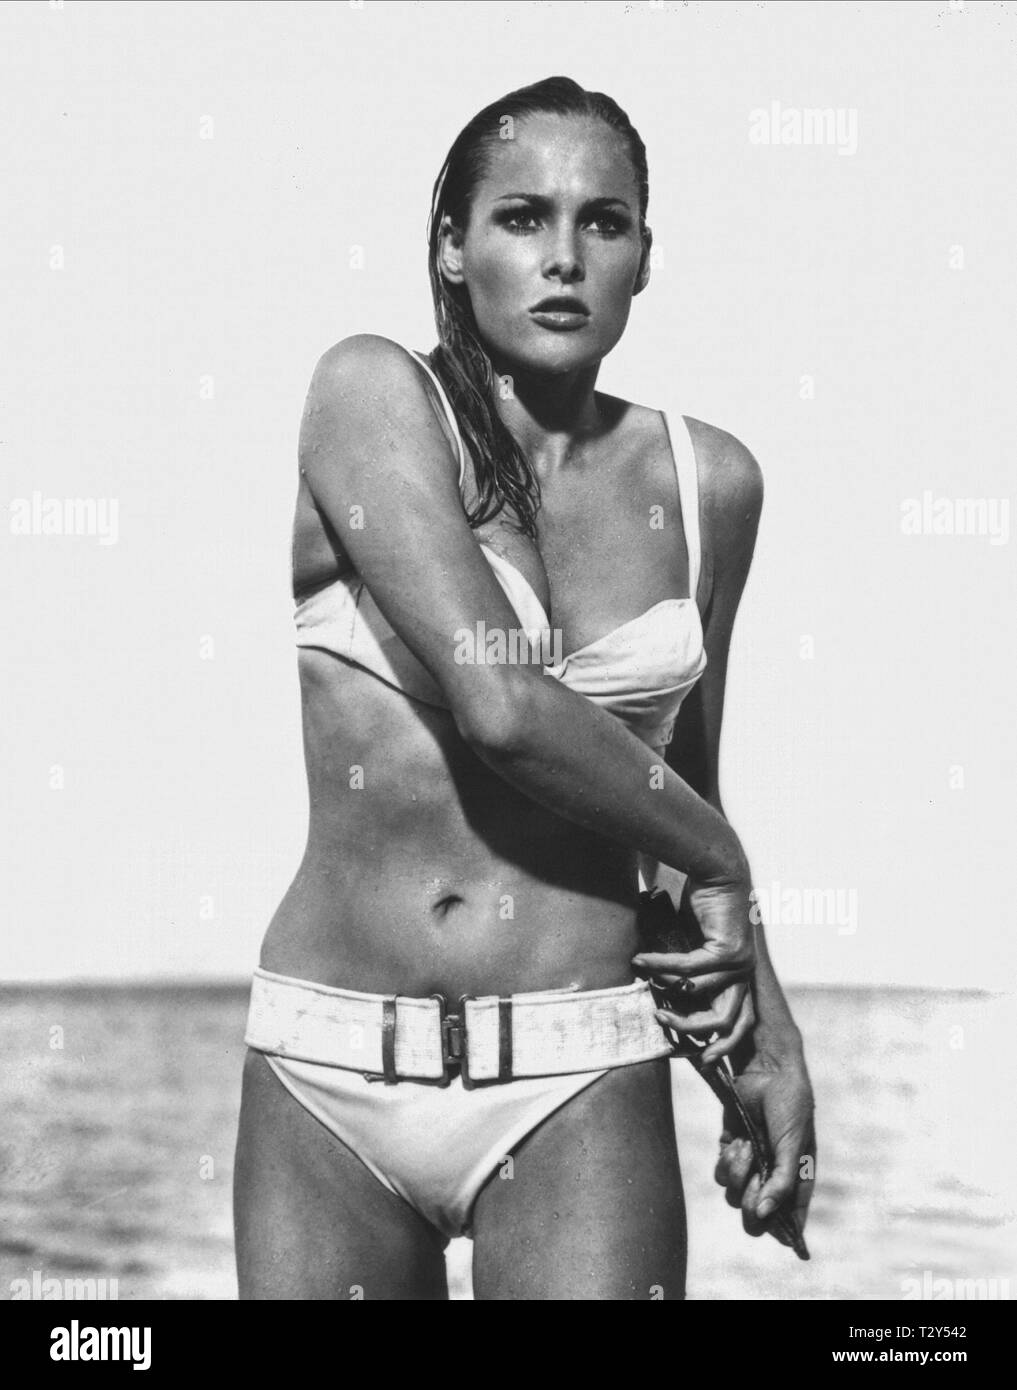 Recent pictures of ursula andress